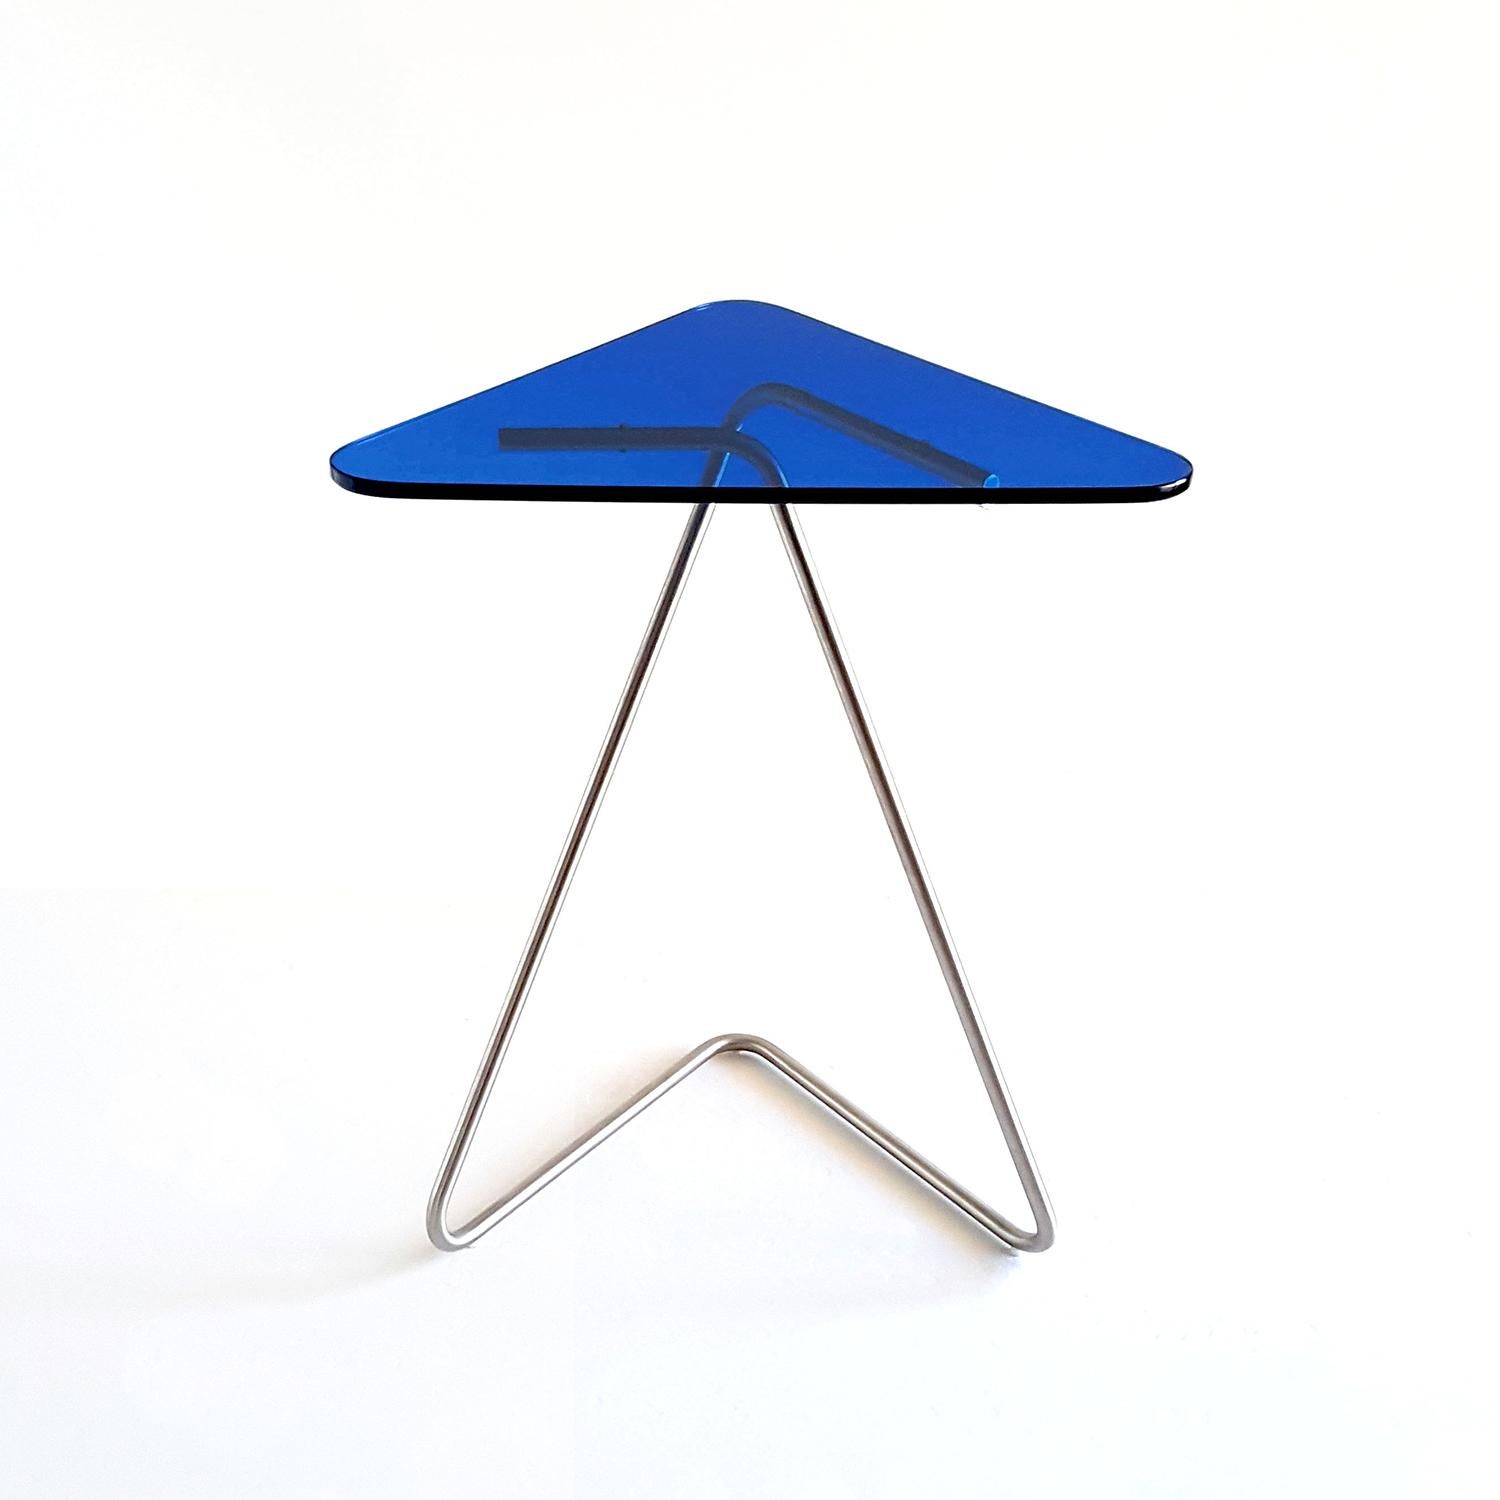 The triangle side table by Rita Kettaneh
Dimensions: The base: brushed stainless steel
 optionally plated with copper or brass
 The top: acrylic
Materials: H 49.5 x W 41 x D 9.5 cm
Weight: 2.6 Kg

Colors and finishes: 
Stainless finish: